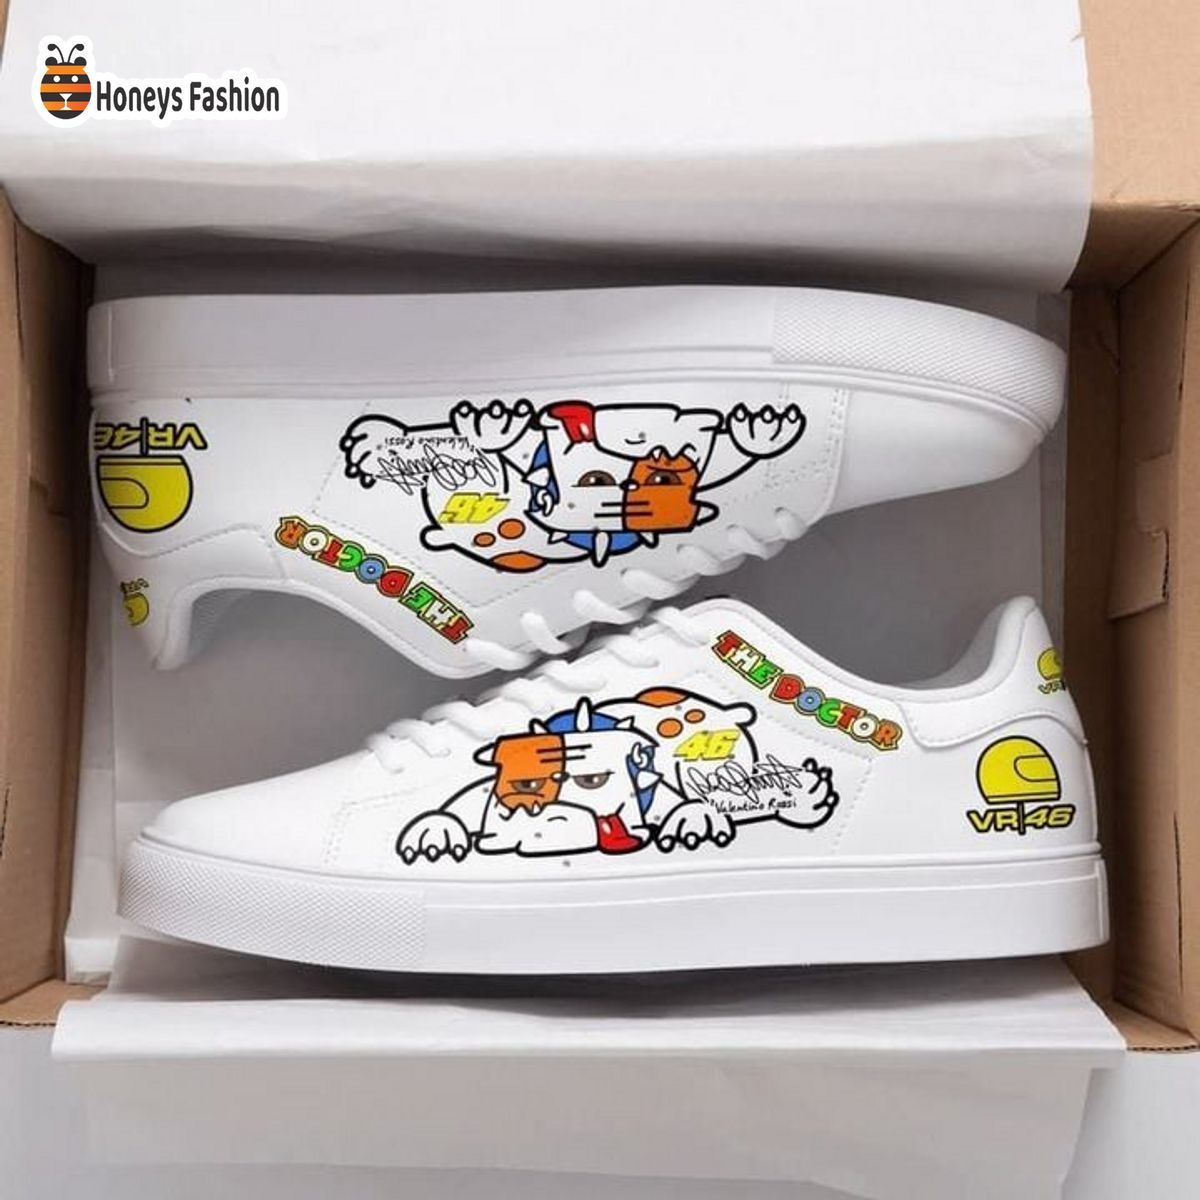 VR46 The Doctor Stan Smith Low Top Shoes